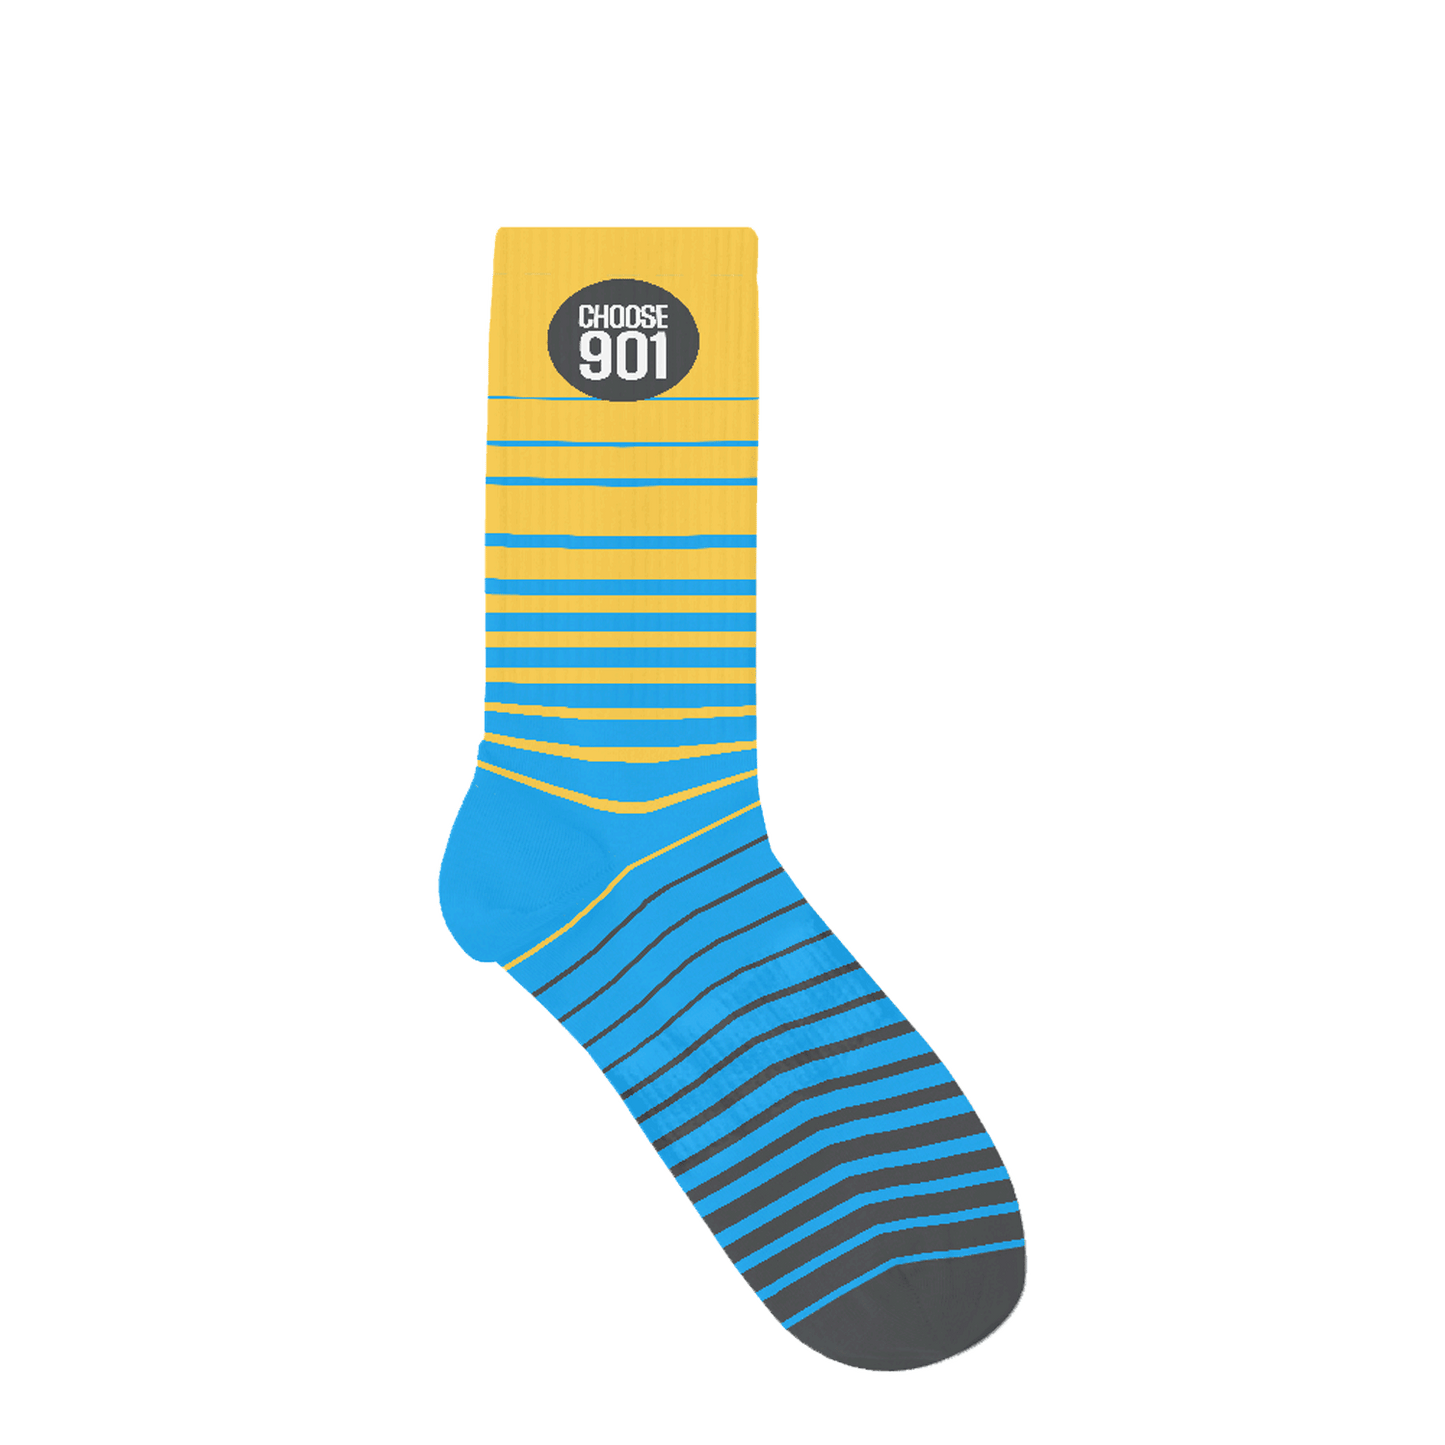 A blue and yellow striped Choose901 sock with "Choose901" text on the yellow cuff, celebrating Memphis.